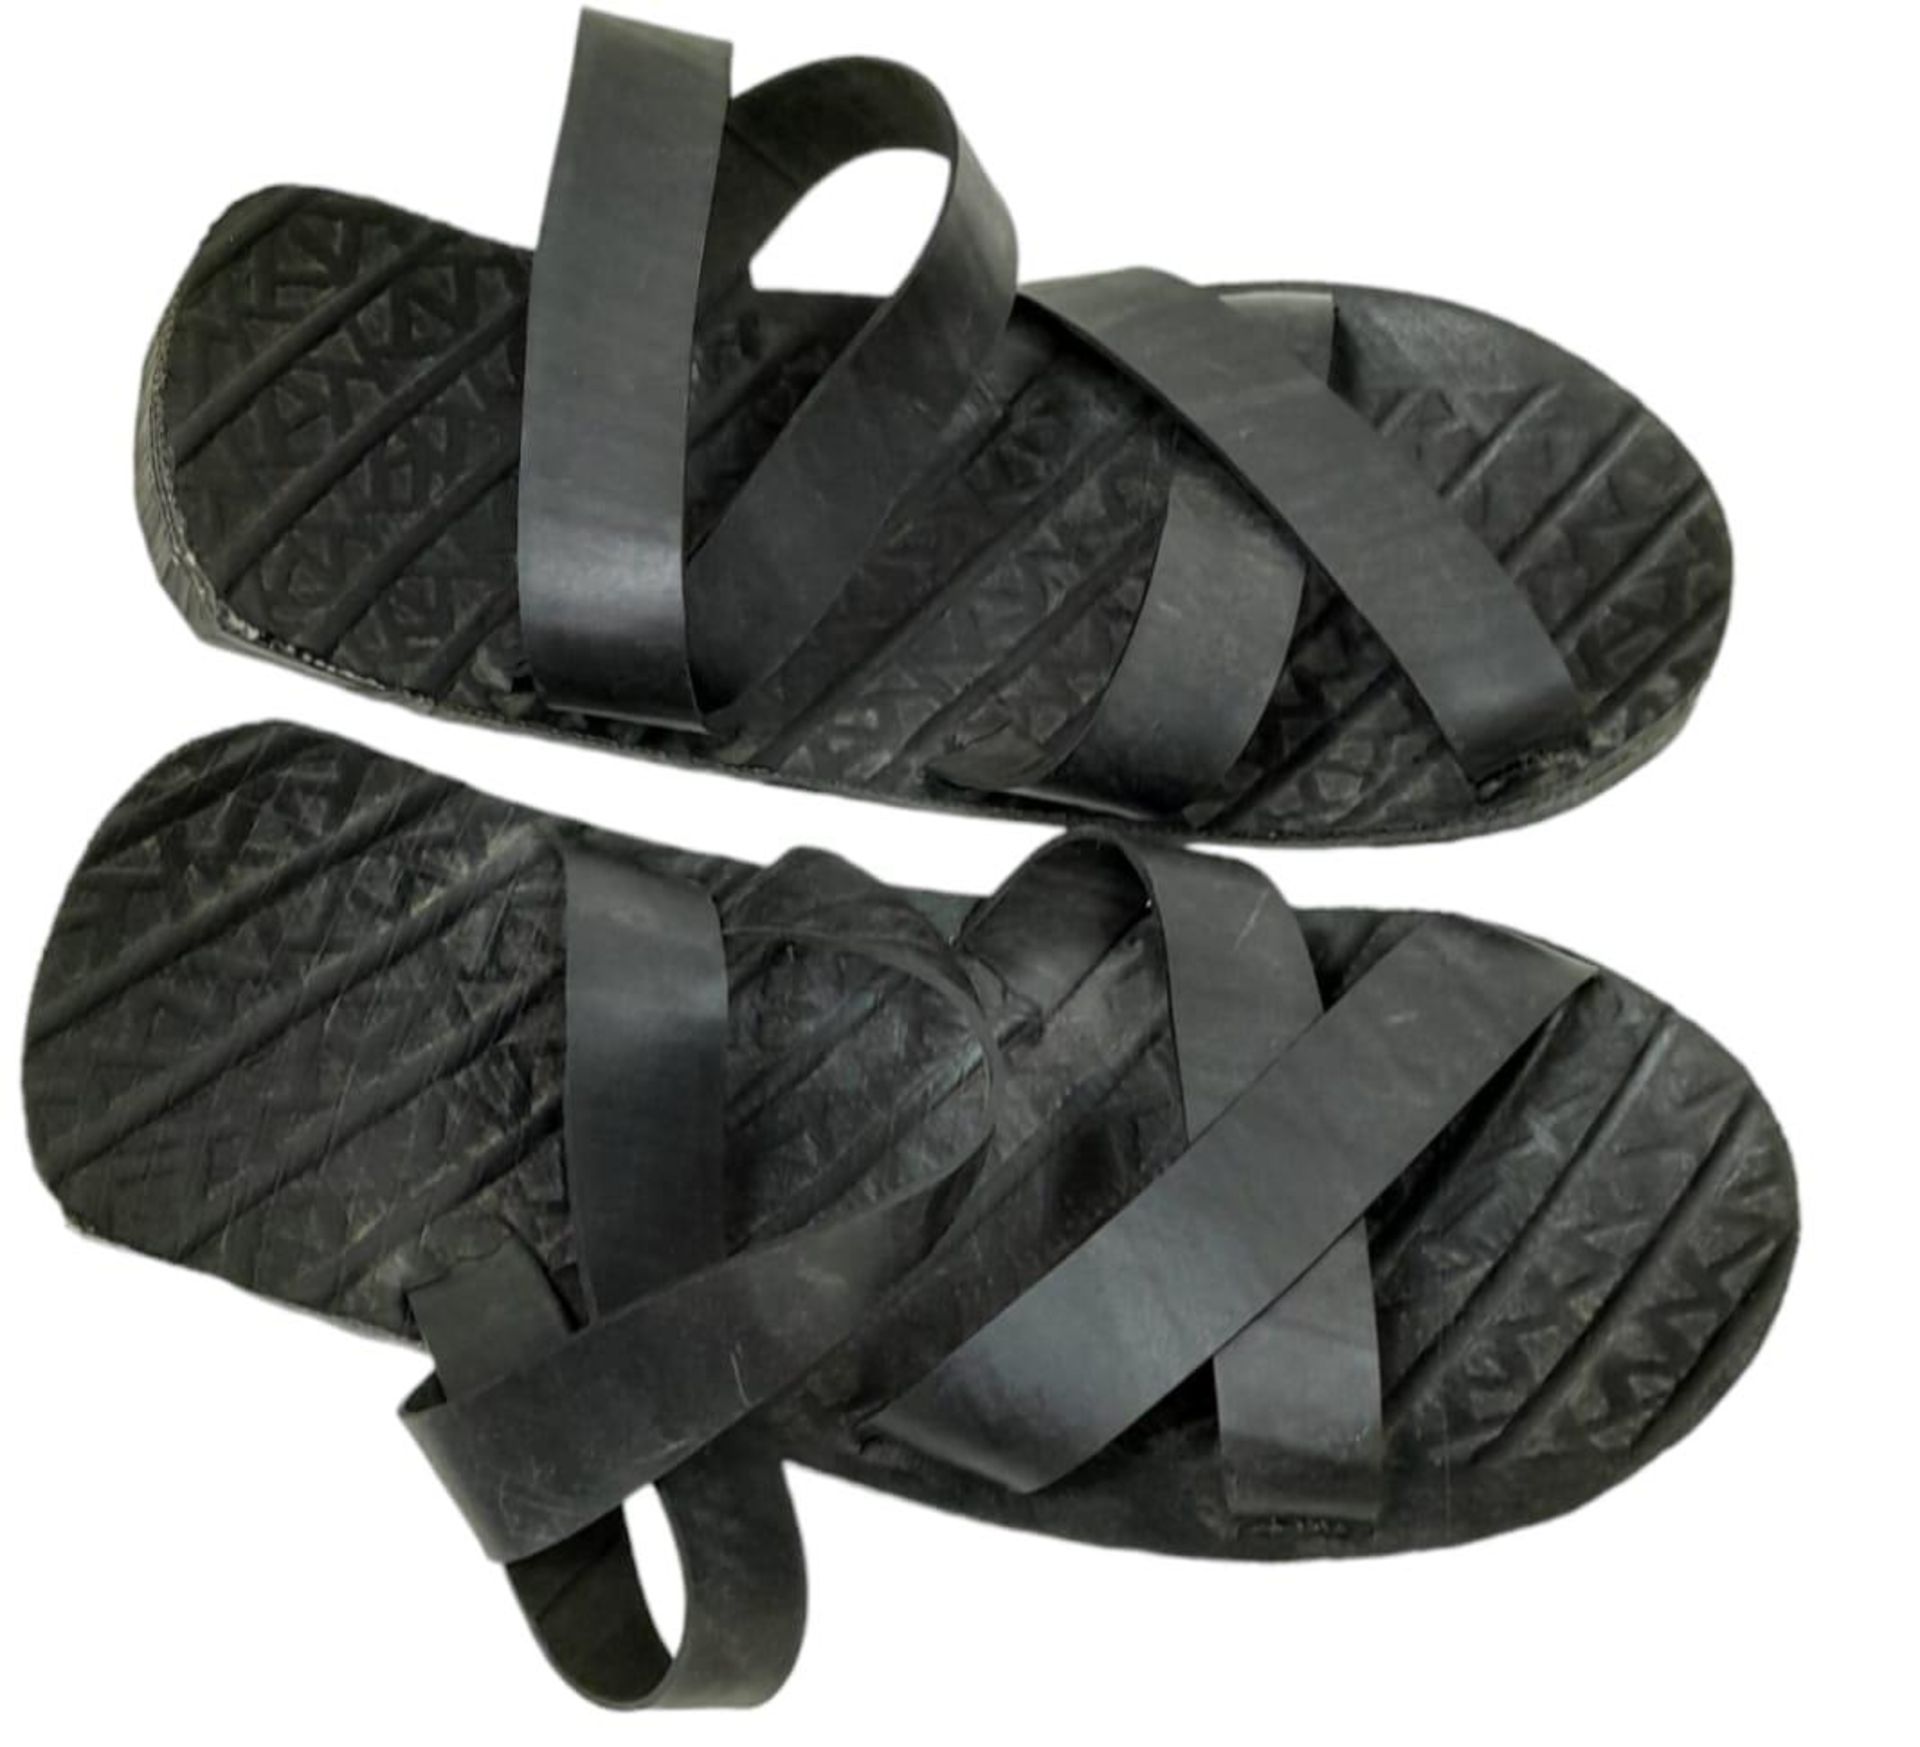 Vietnam War Era Vietcong “Ho Chi Minh” Sandals made from old truck tyres. - Image 4 of 4